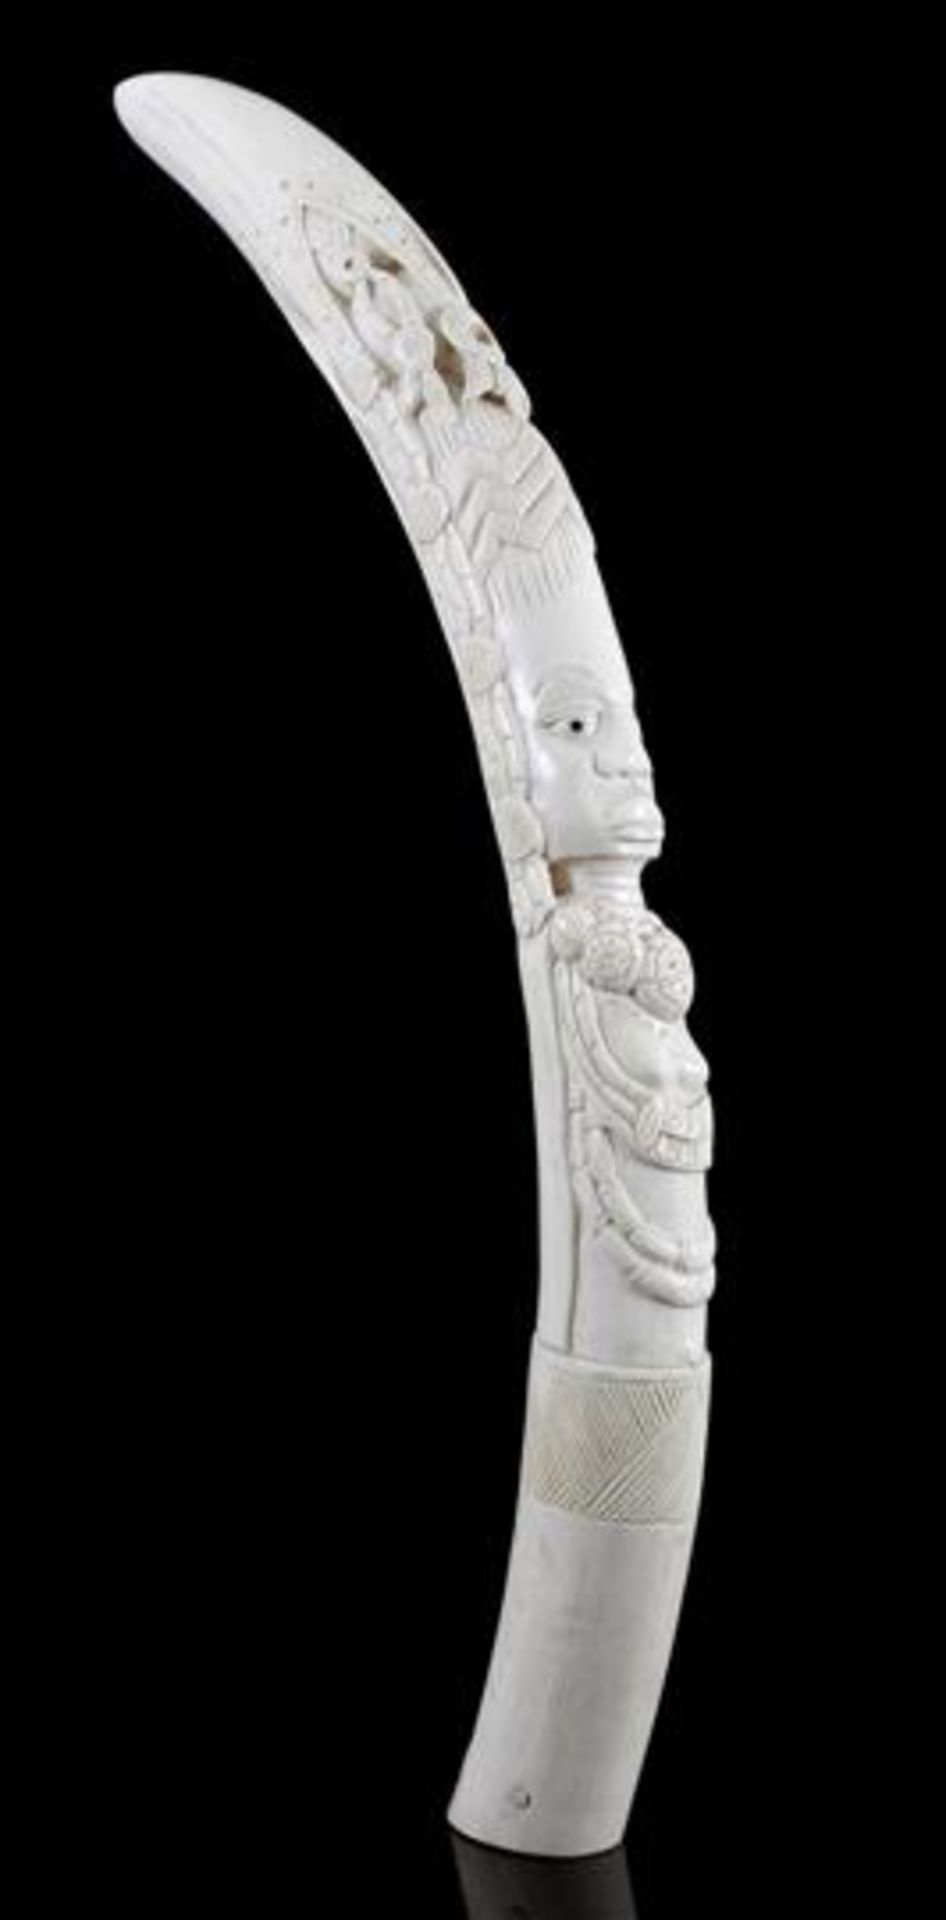 Richly carved ivory tooth with a hand-carved representation of a person with decorative ornaments.